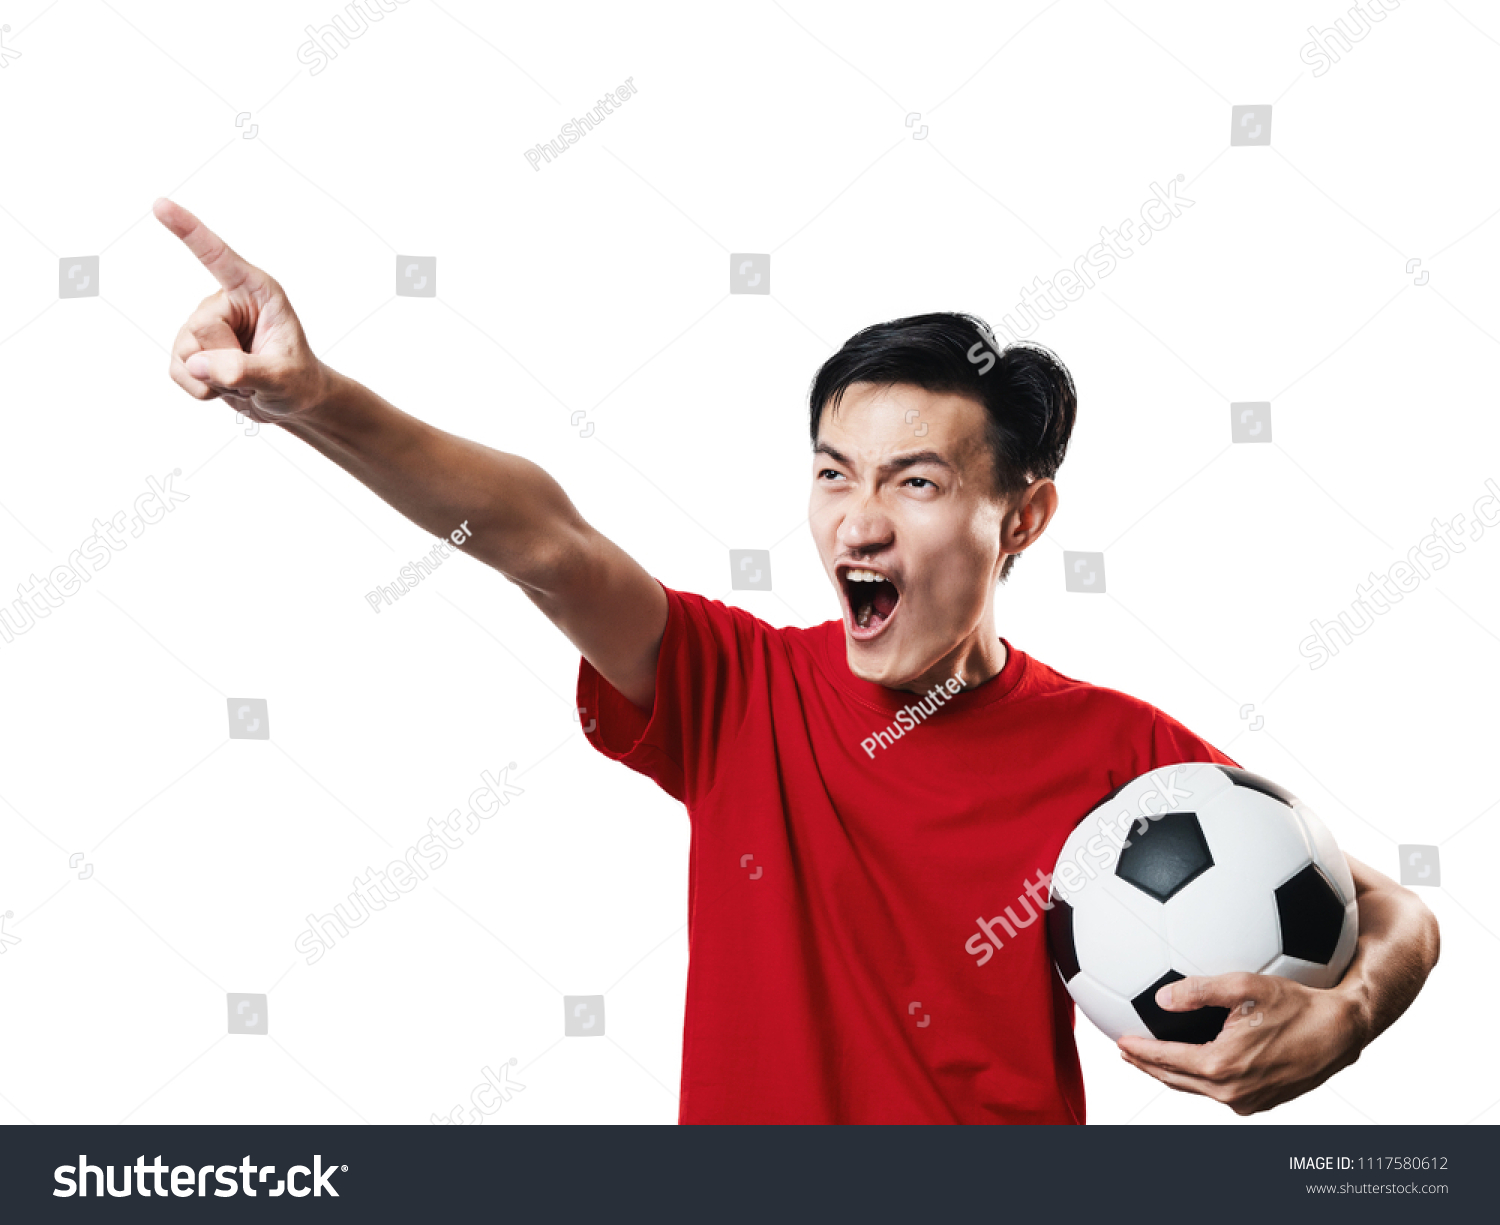 Asian Thai people soccer fan football in red sleeve shirt isolated on white background high contrast. #1117580612